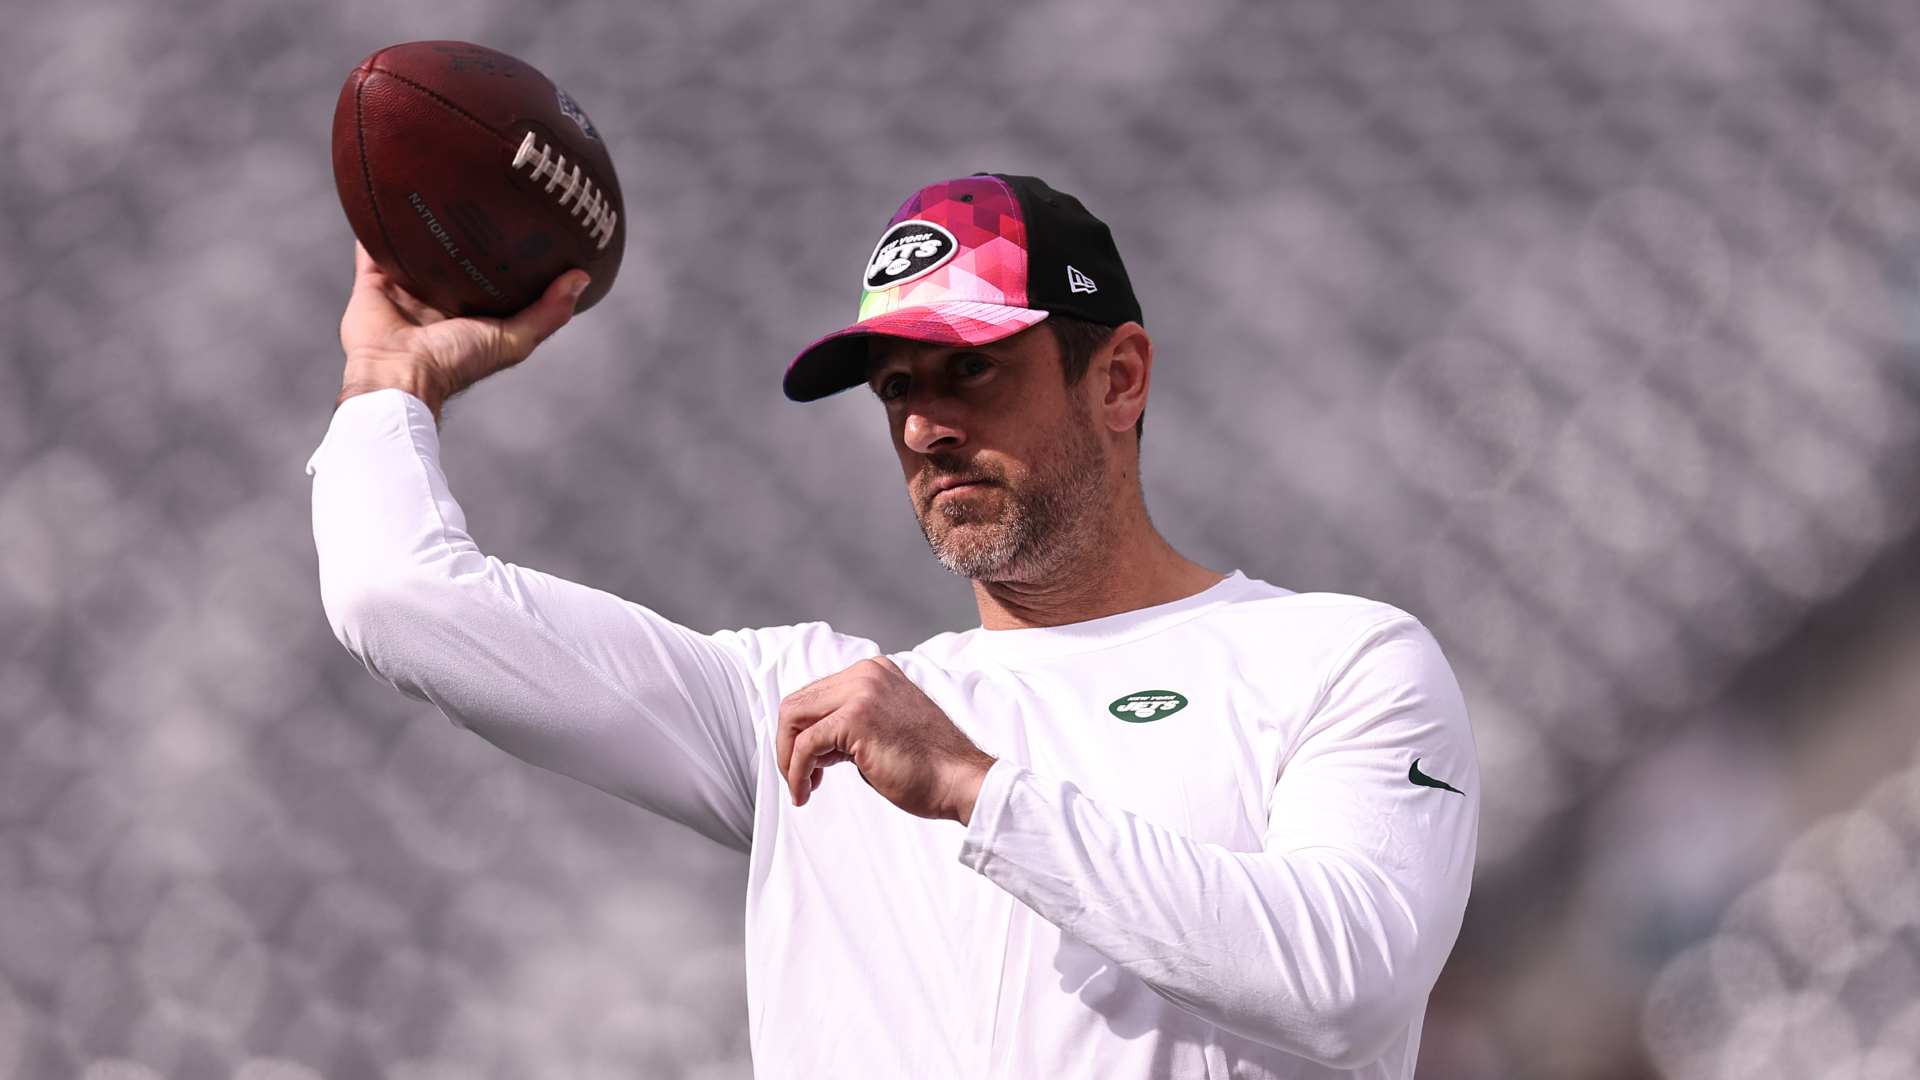 aaron rodgers addresses kimmel comments, jets future in exit interview: 'the fire's still really strong'